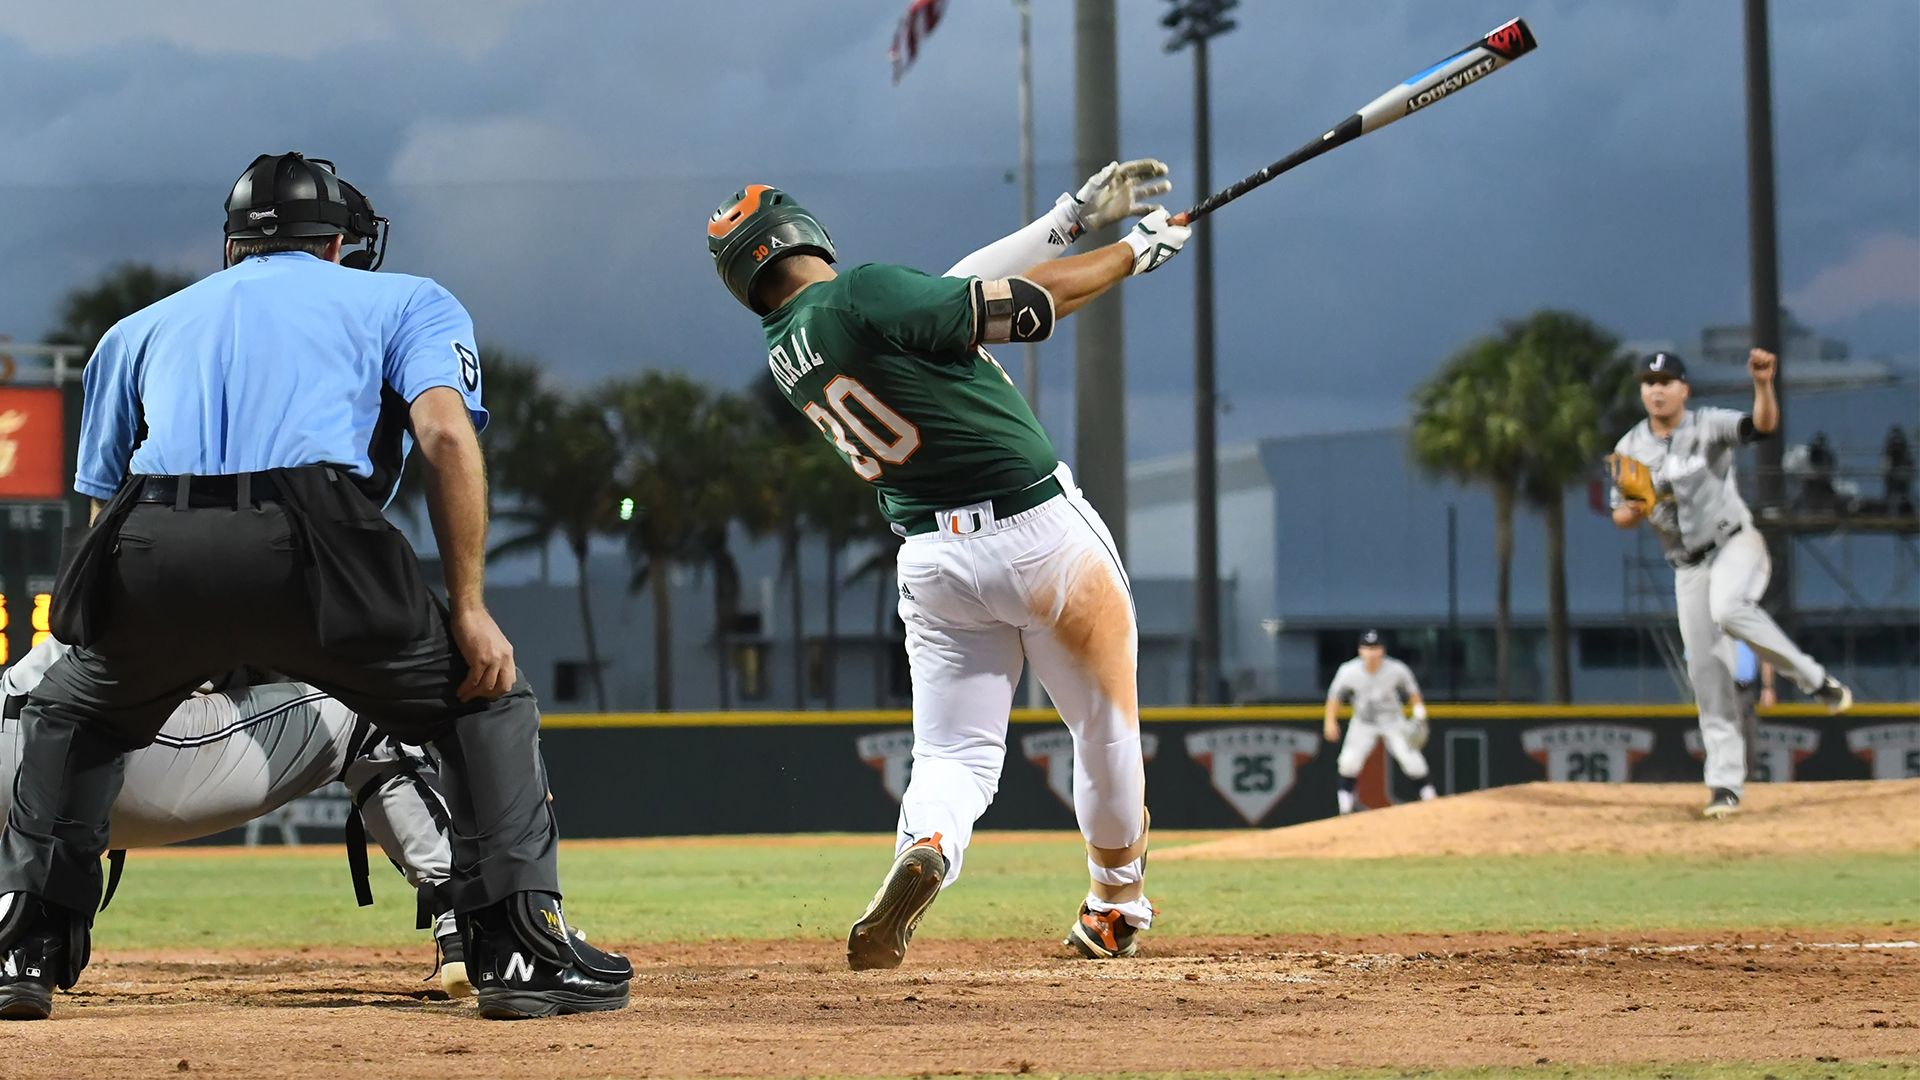 Canes Close Midweek Sweep of Jackson State, 8-1